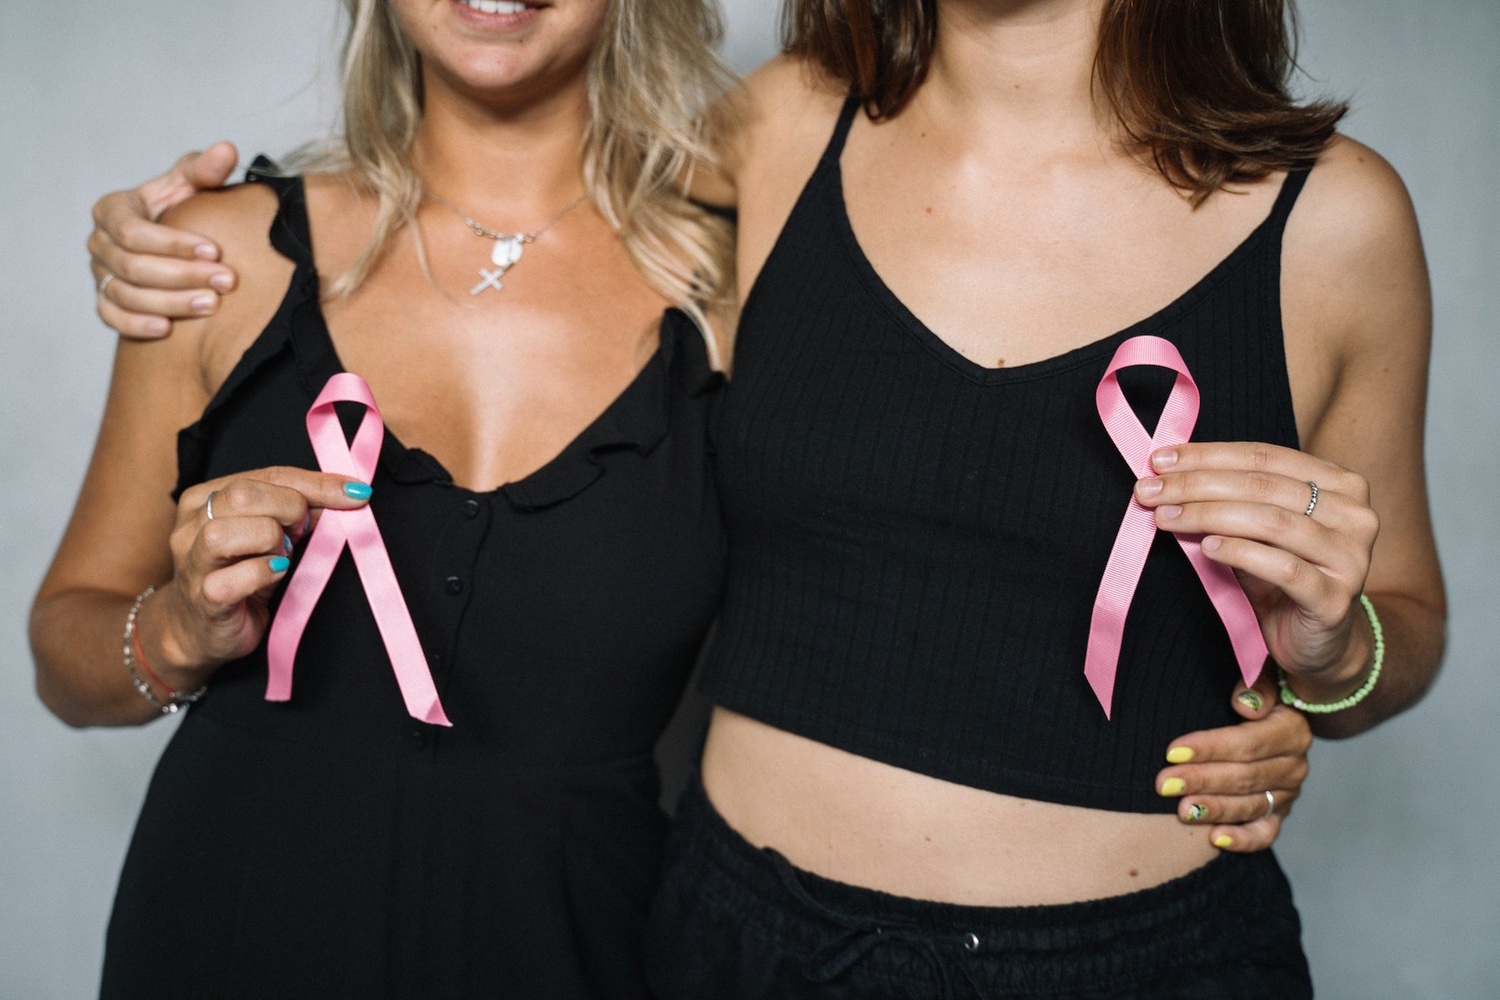 You know what is the relationship between breast cancer and diabetes?